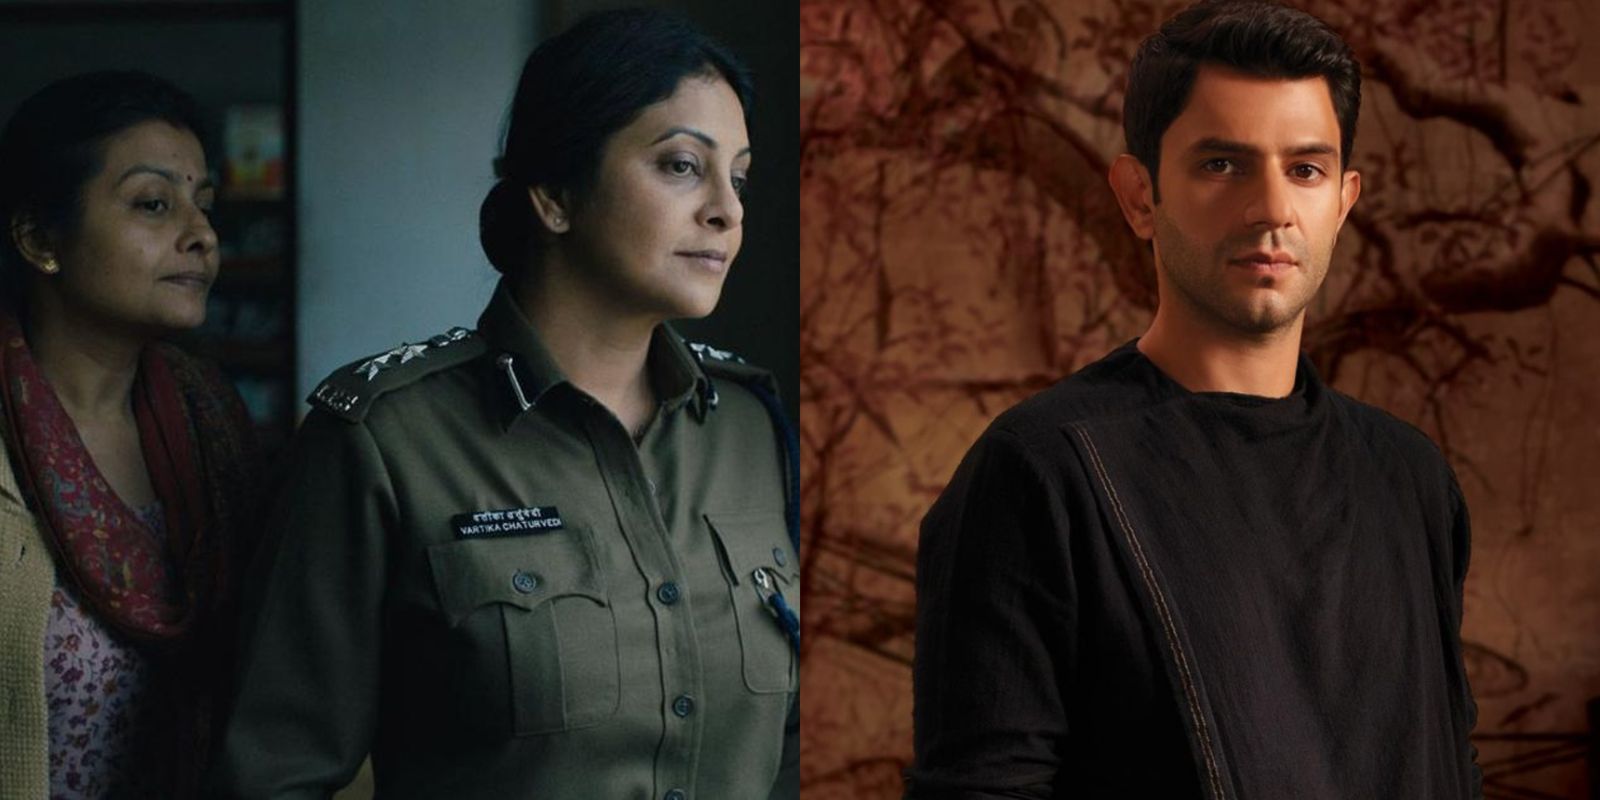 International Emmys 2020: Arjun Mathur Nominated As Best Actor For Made In Heaven; Four More Shots Please, Delhi Crime Also Nominated